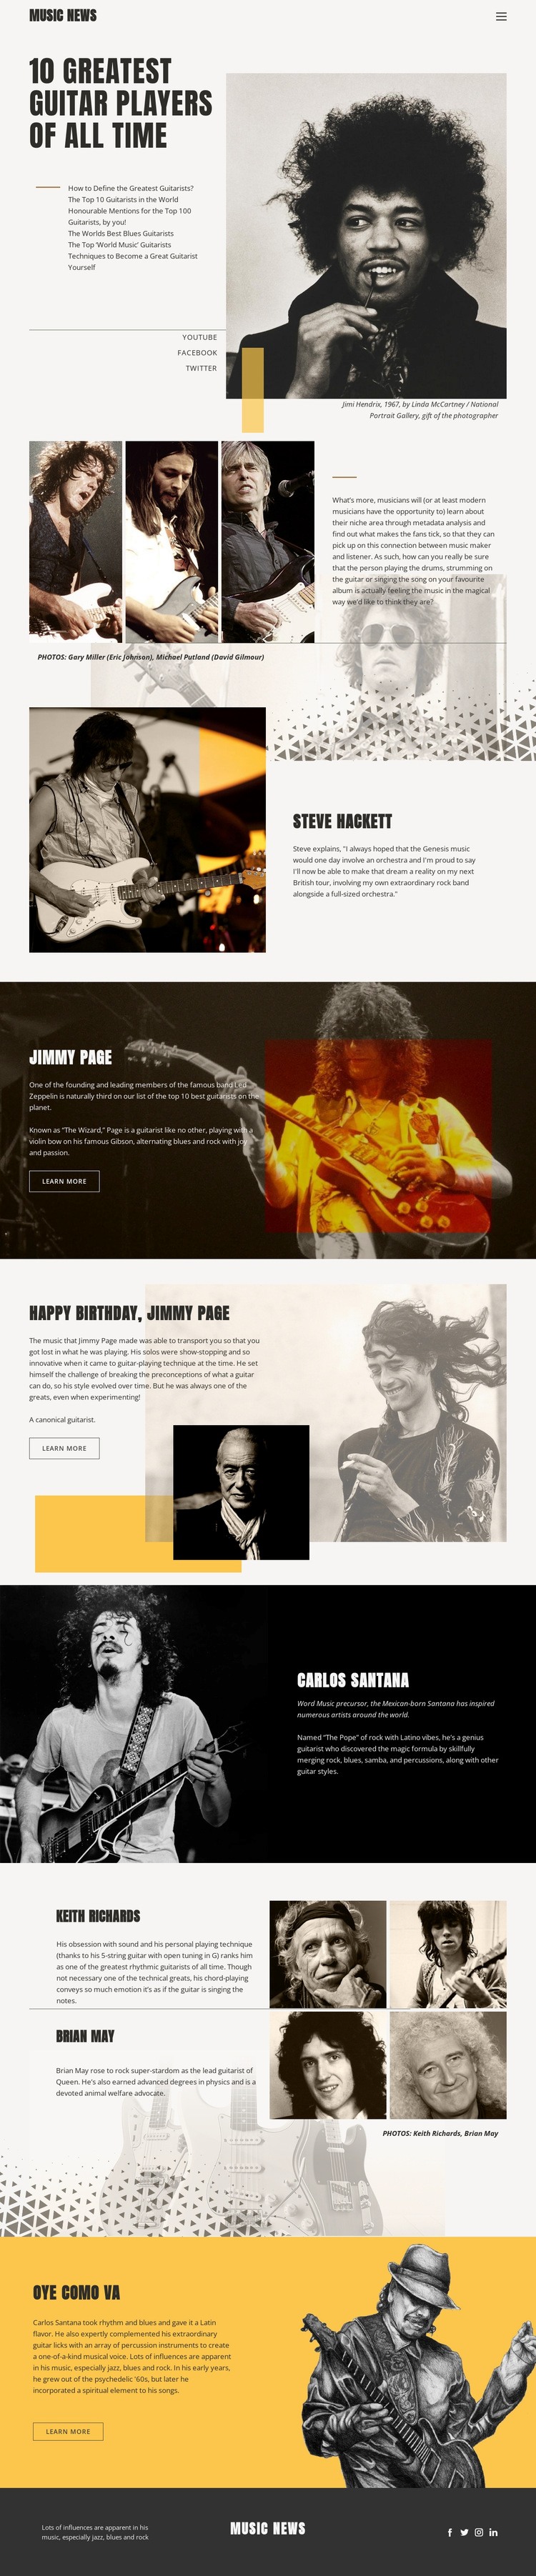 The Top Guitar Players Html Code Example